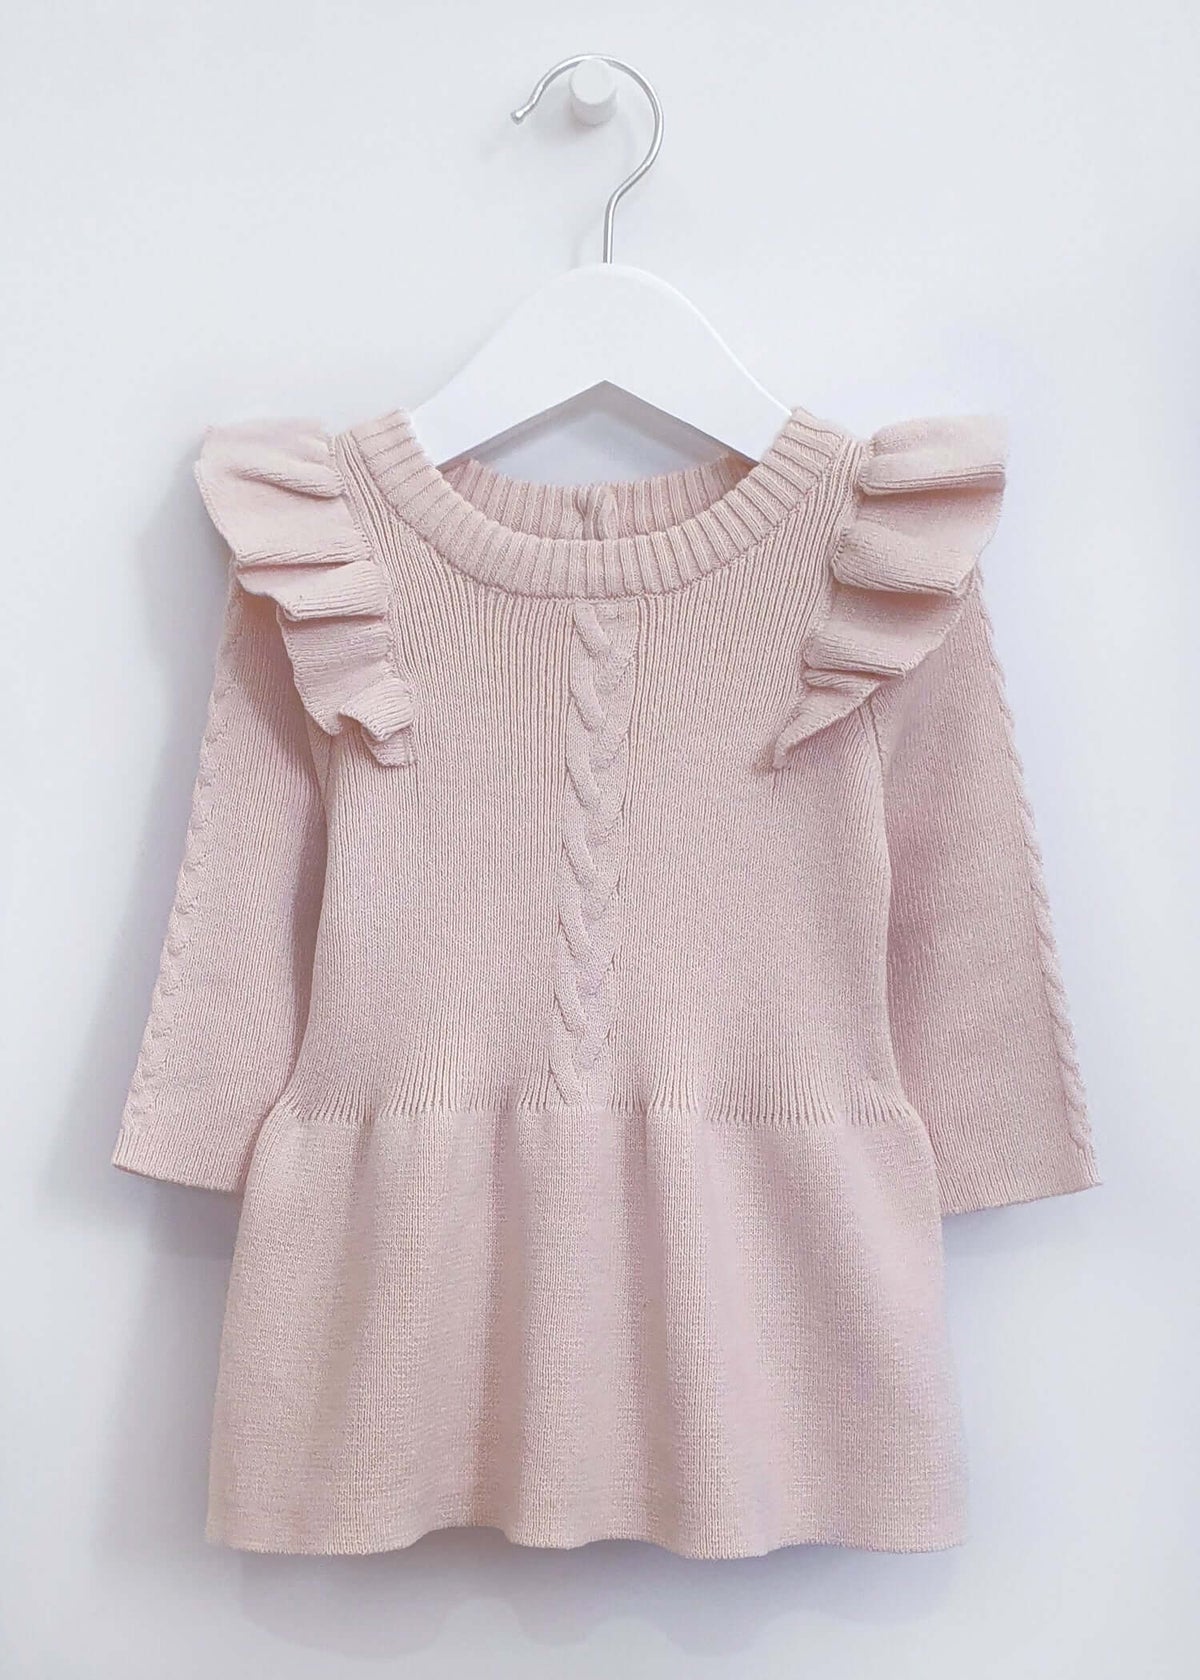 Beautiful Beige Flutter Sleeve Knitted Dress: Made from soft knit, beautiful frill detail on shoulders. Perfect for any occasion, this dress offers both style and comfort for your baby girl